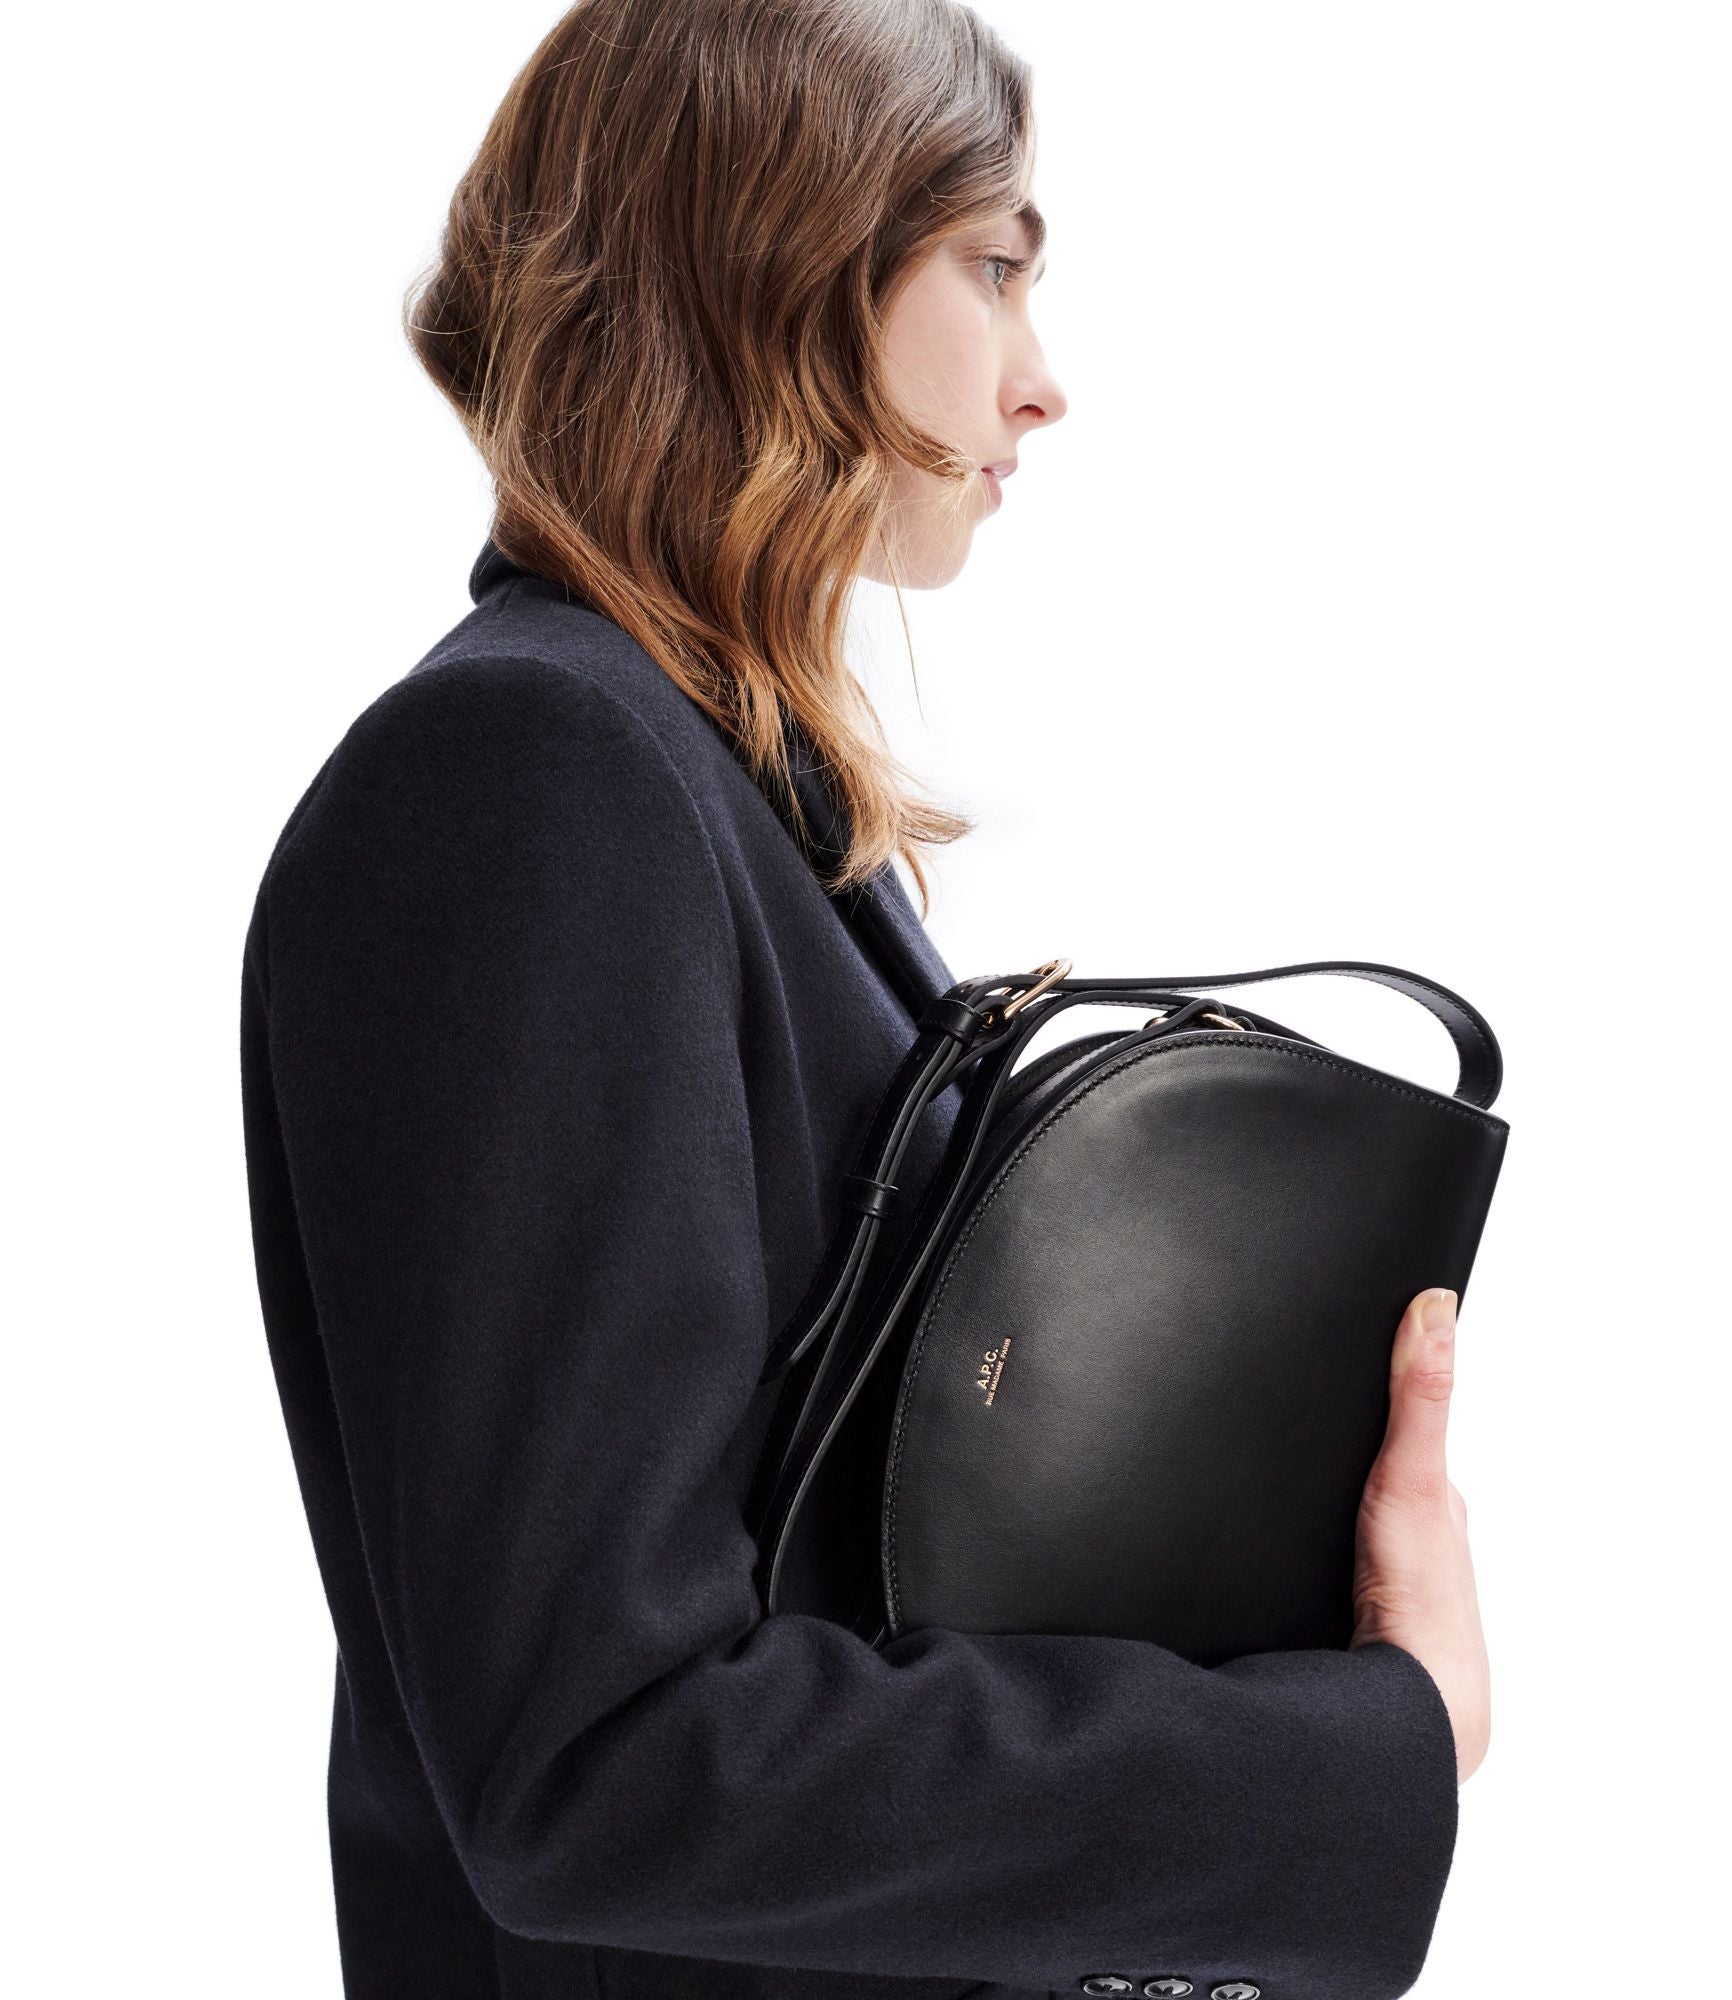 Demi lune bag, black (smooth leather)